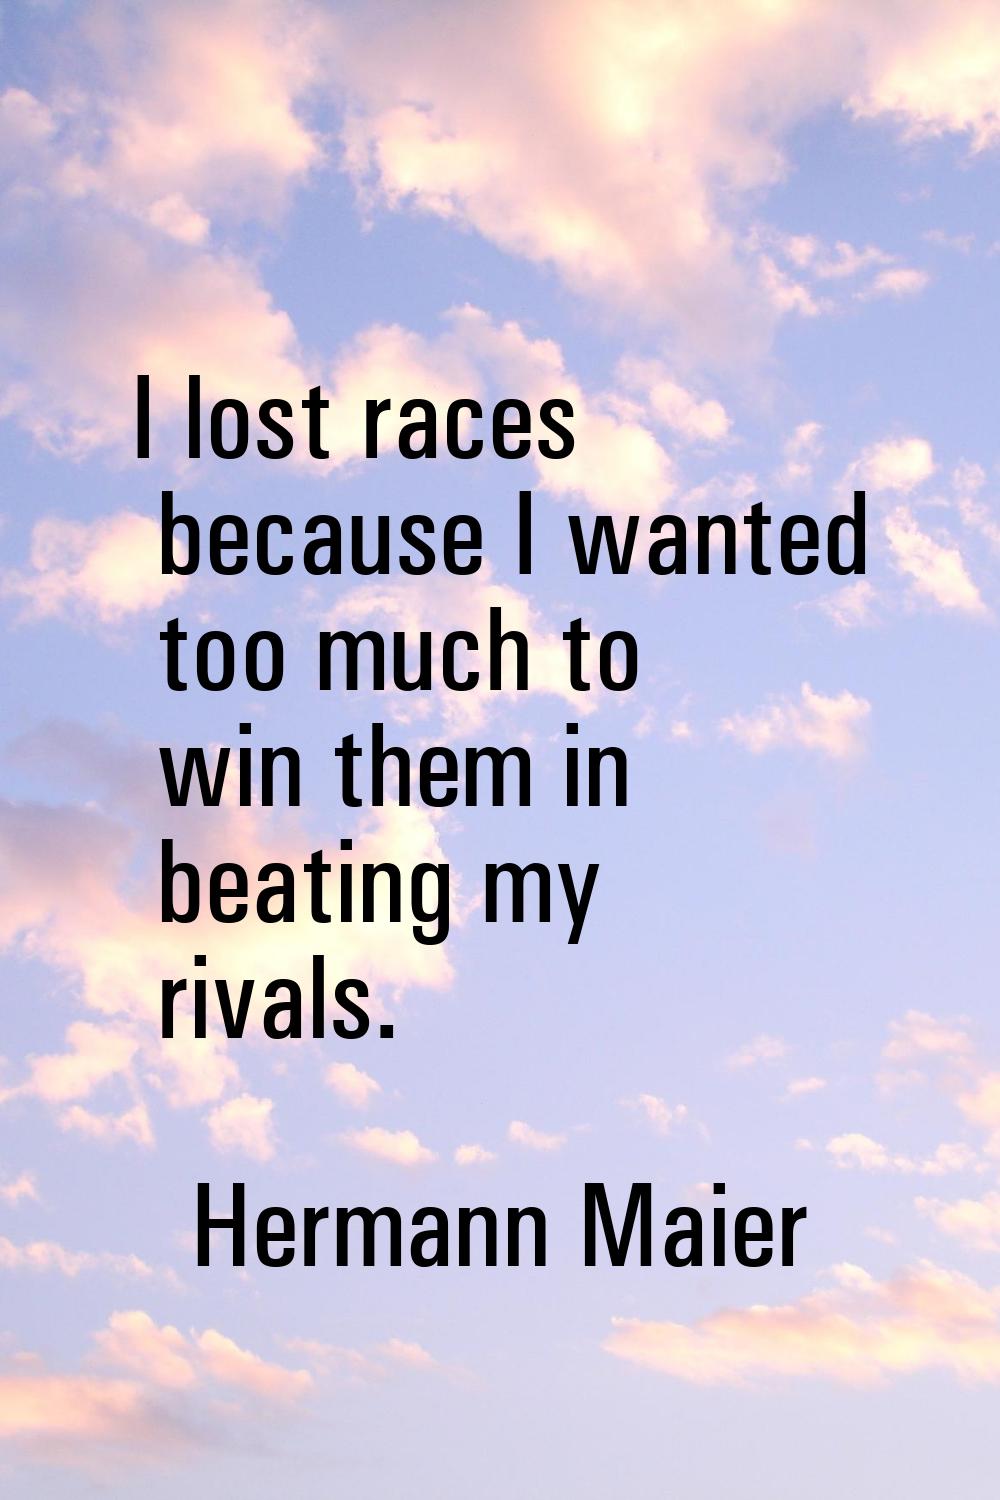 I lost races because I wanted too much to win them in beating my rivals.